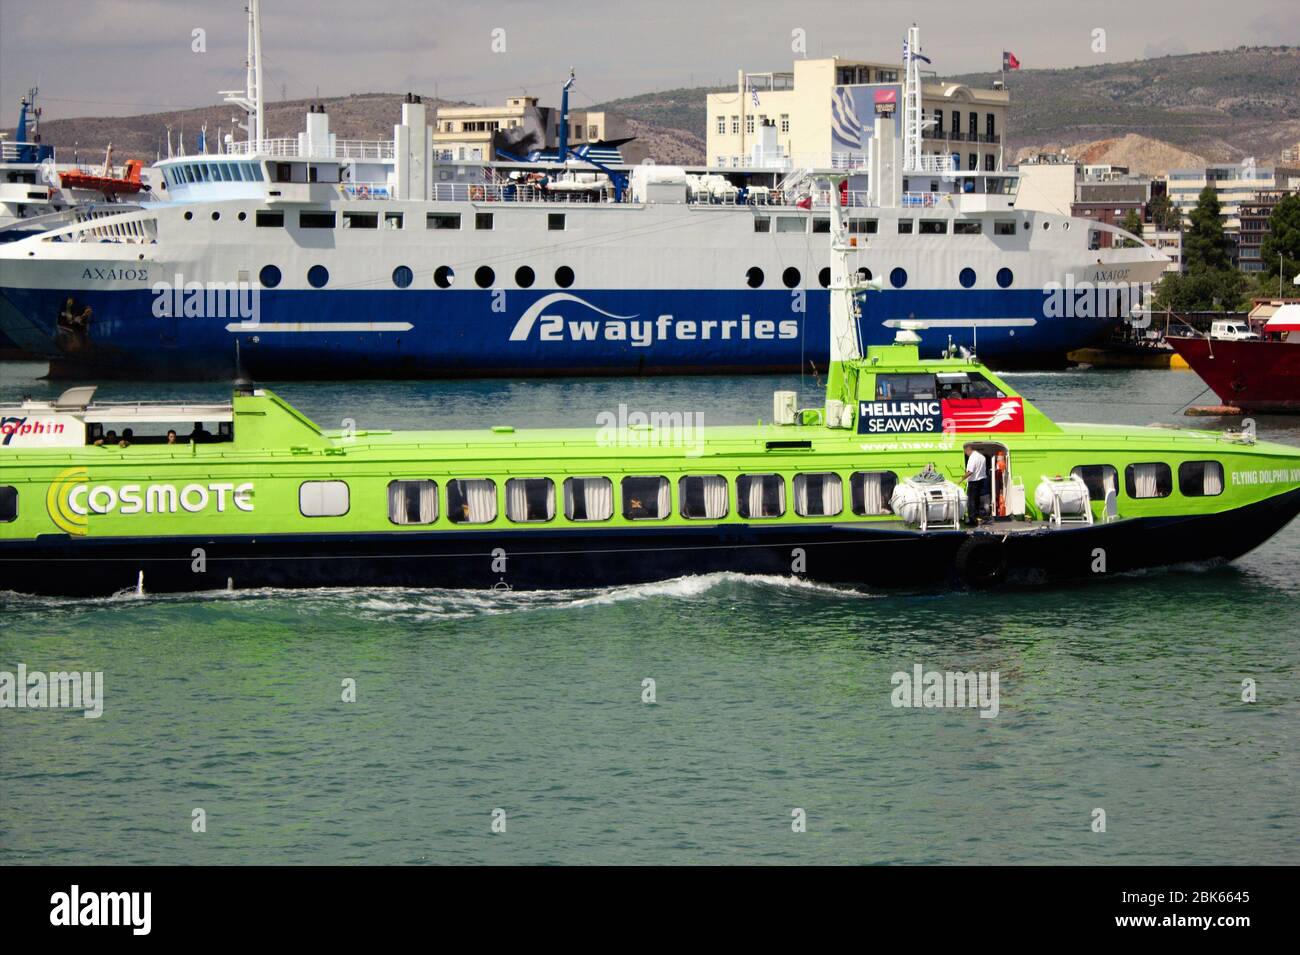 Scenic at the port of Piraeus, Greece, with ferries and flying cat in the background, September 23 2015. Stock Photo